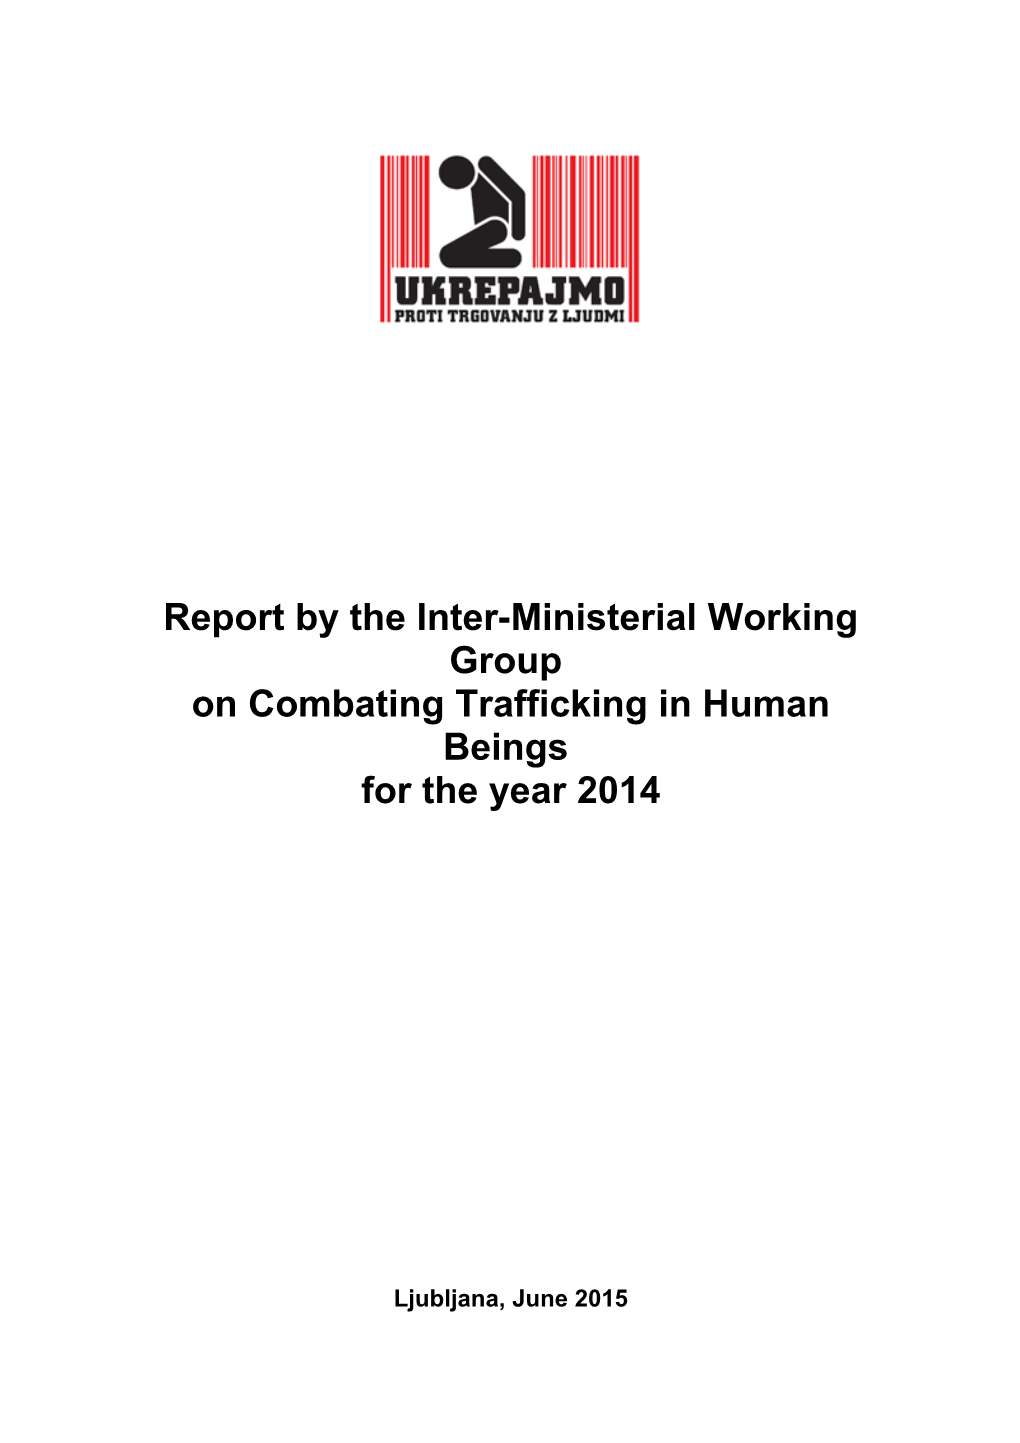 Report by the Inter-Ministerial Working Group